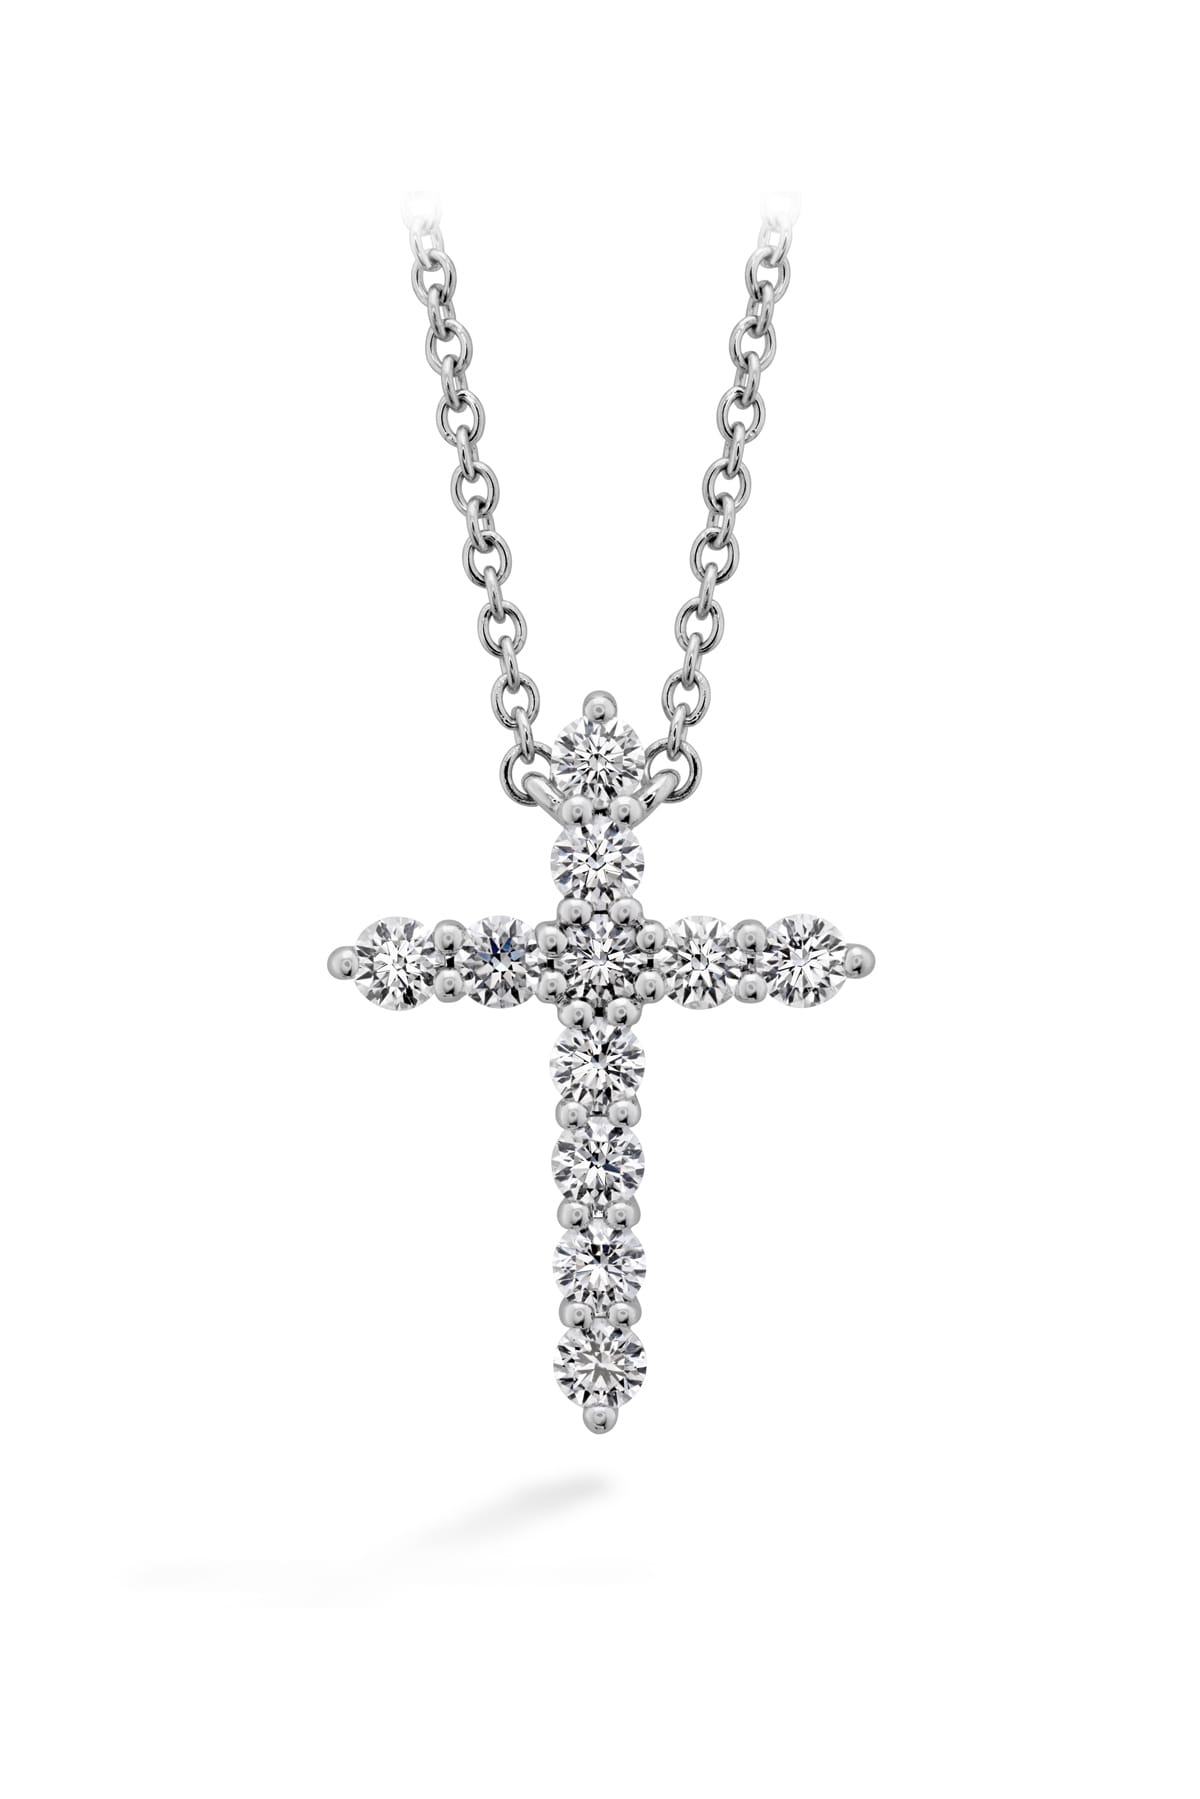 Signature Cross Pendant - Large From Hearts On Fire available at LeGassick Diamonds and Jewellery Gold Coast, Australia.